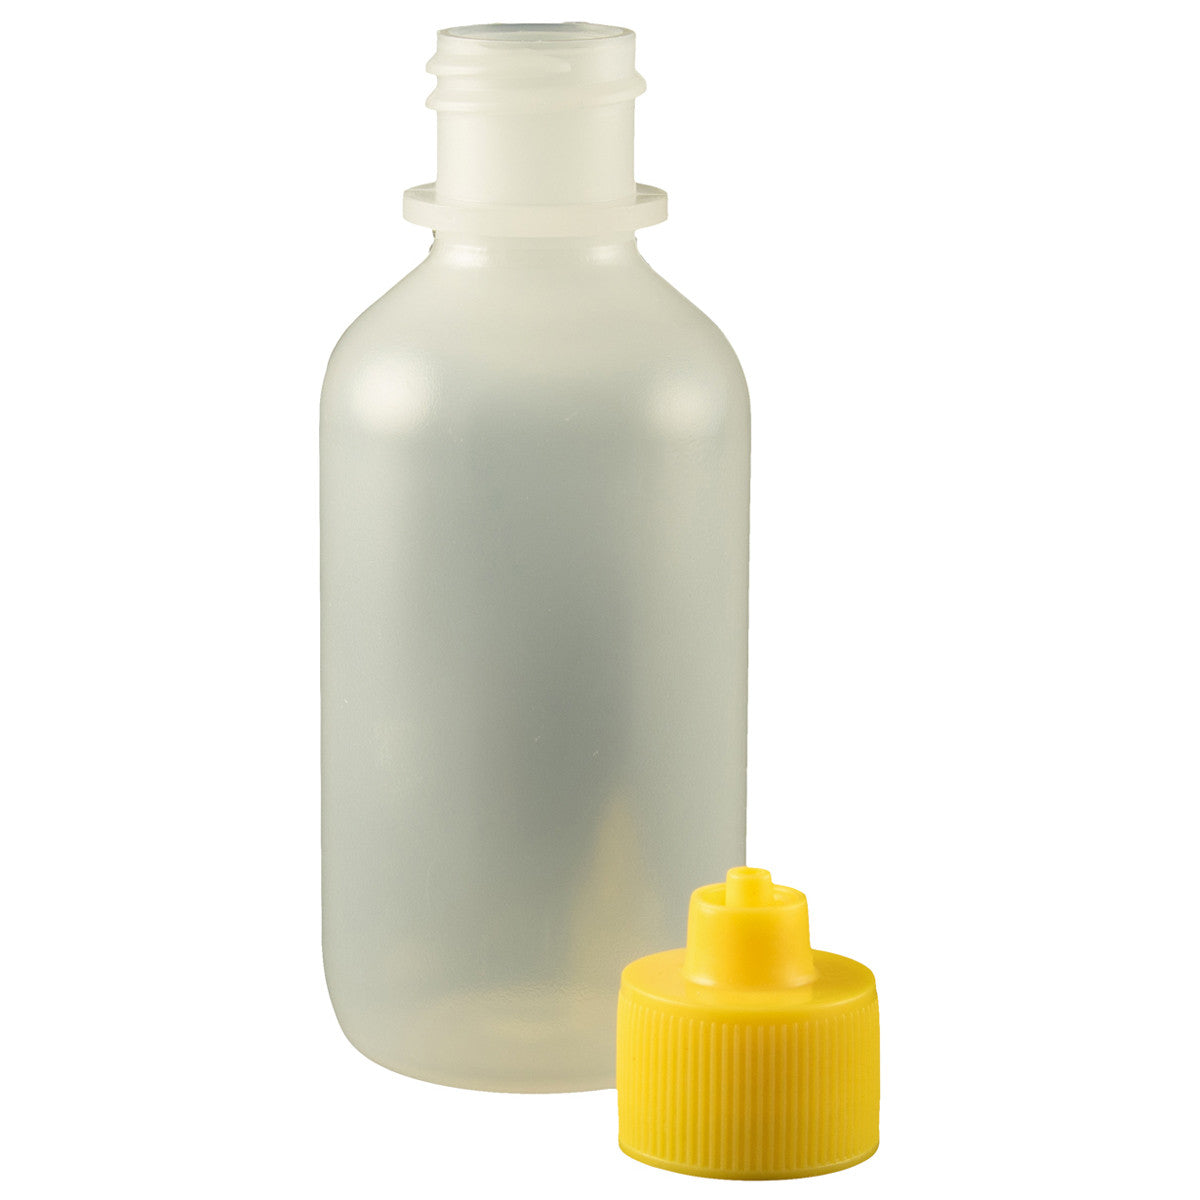 510 Central Mini Squeeze Bottles (1/2oz, 12 Pack) Boston Round with Snap Top Caps - LDPE Plastic - Made in USA